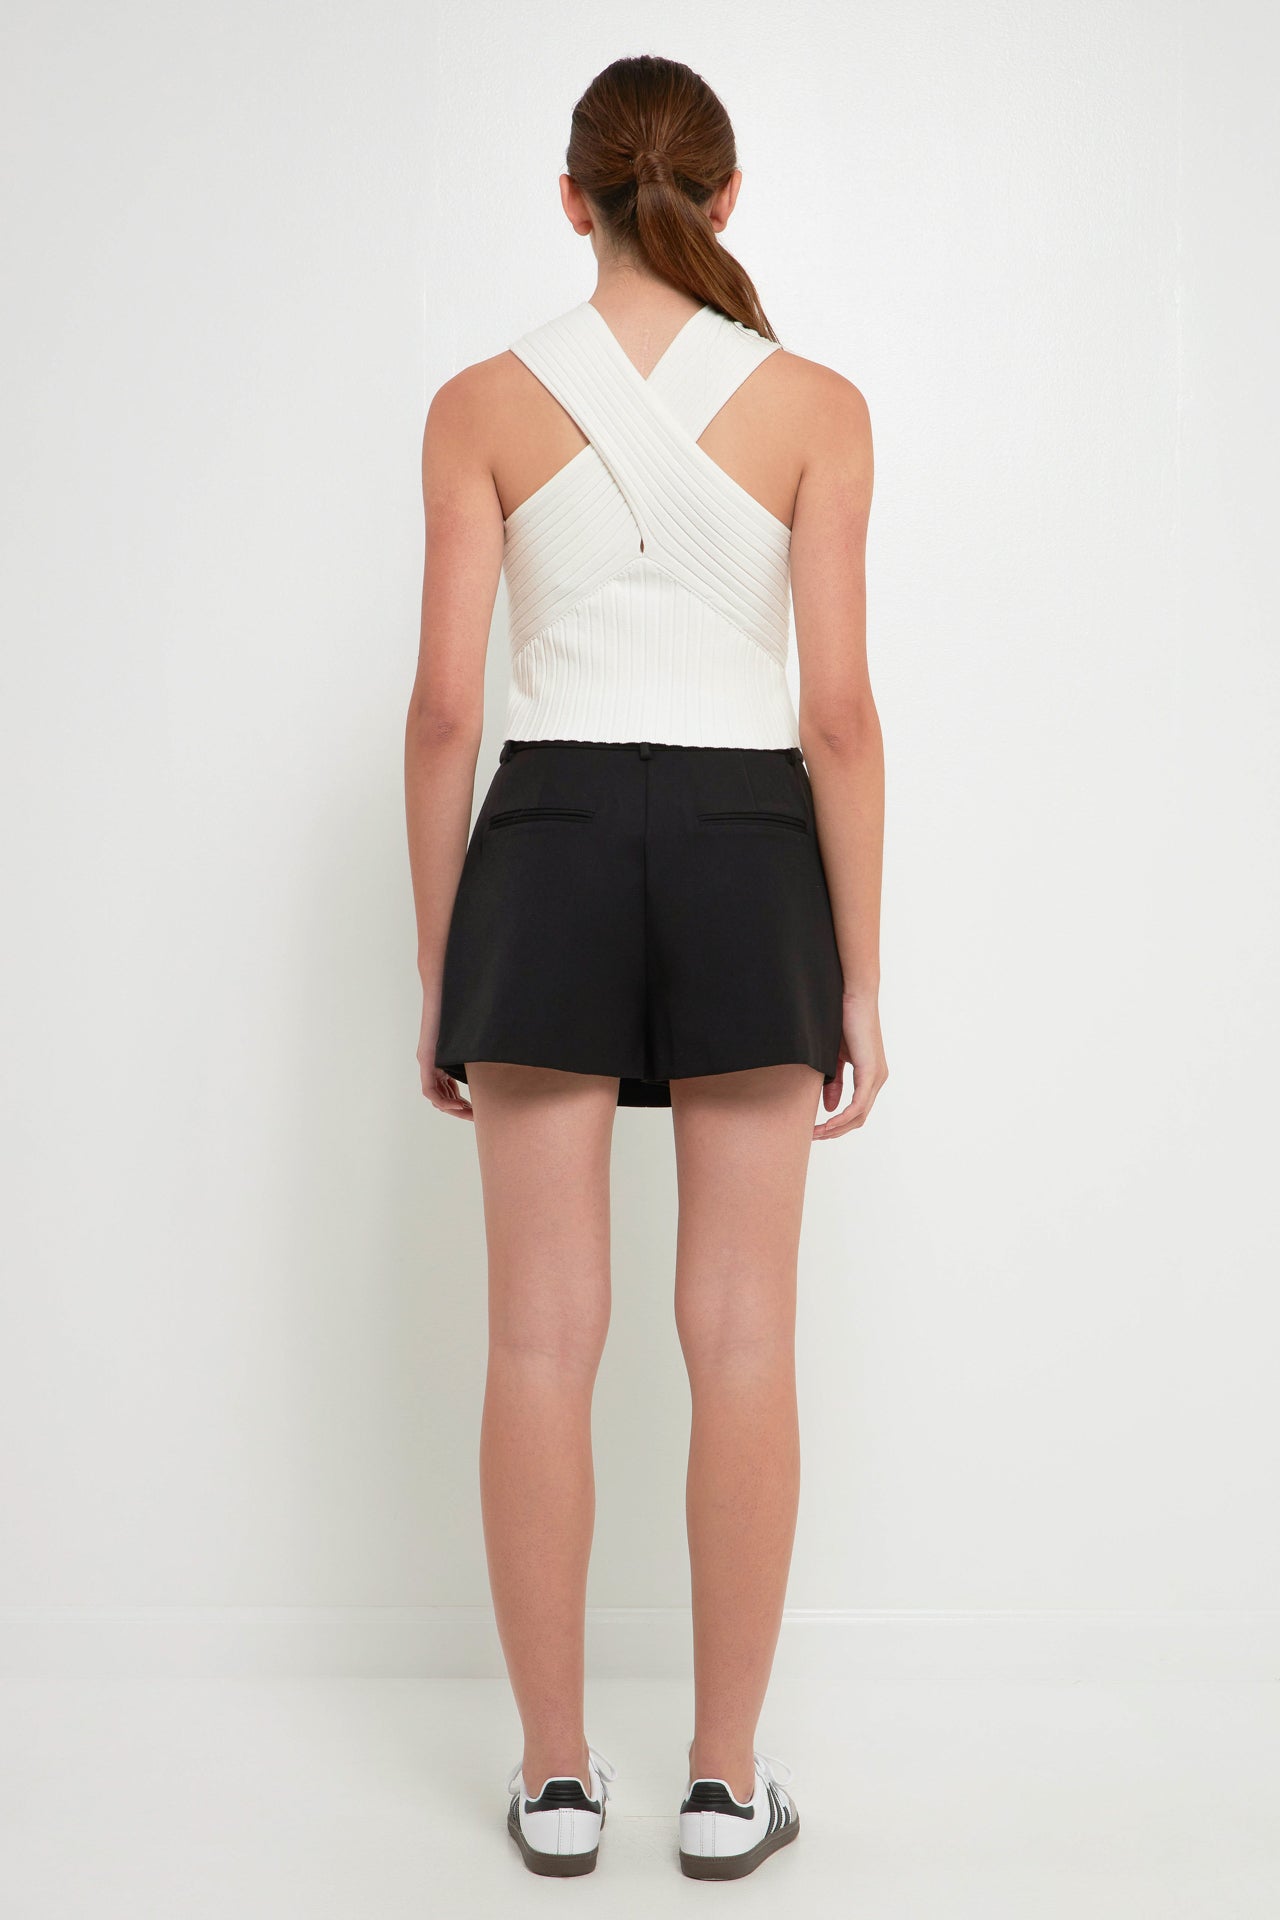 GREY LAB - Fine Rib Knit Halter Peekaboo Top - TOPS available at Objectrare